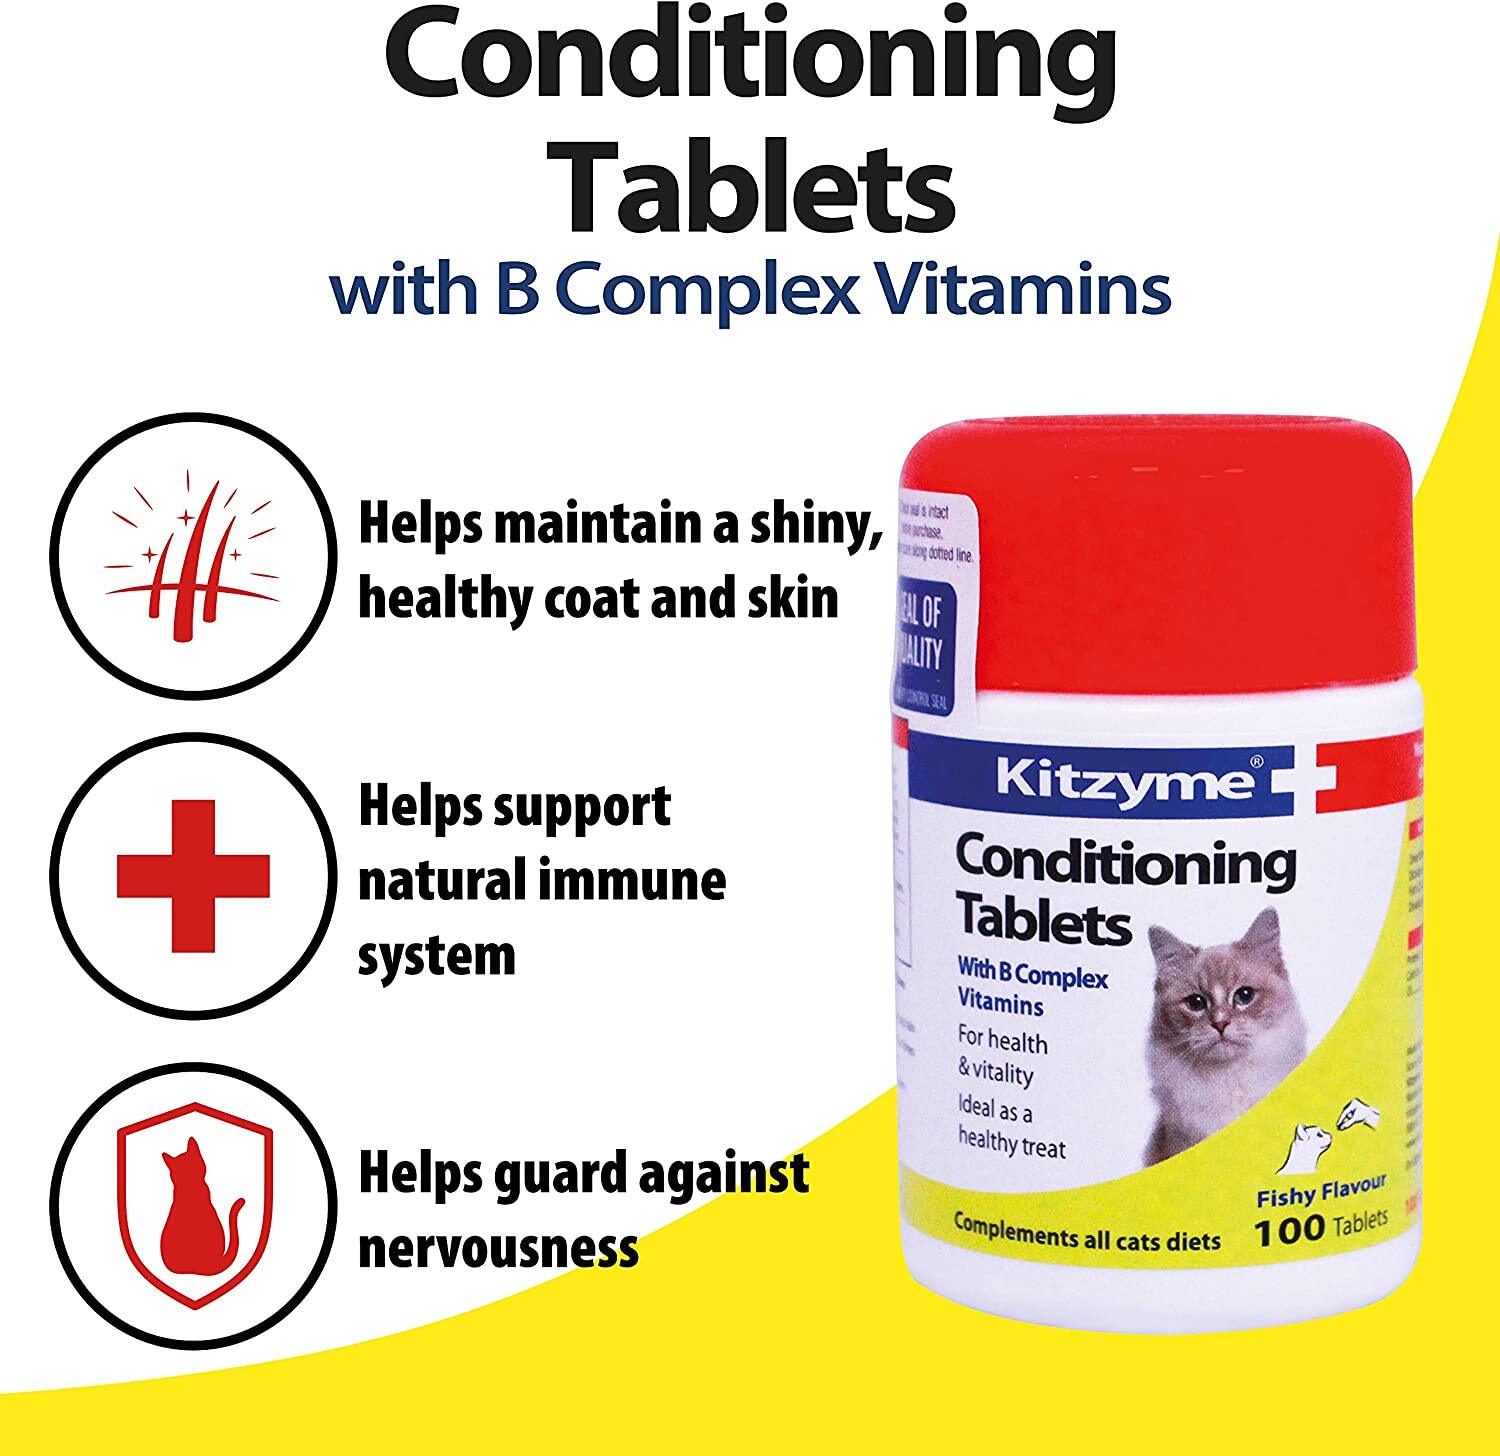 Kitzyme Conditioning Tablets for Cats and Kittens cat vitamin kucing supplement health vitality appetite energetic improve immune system